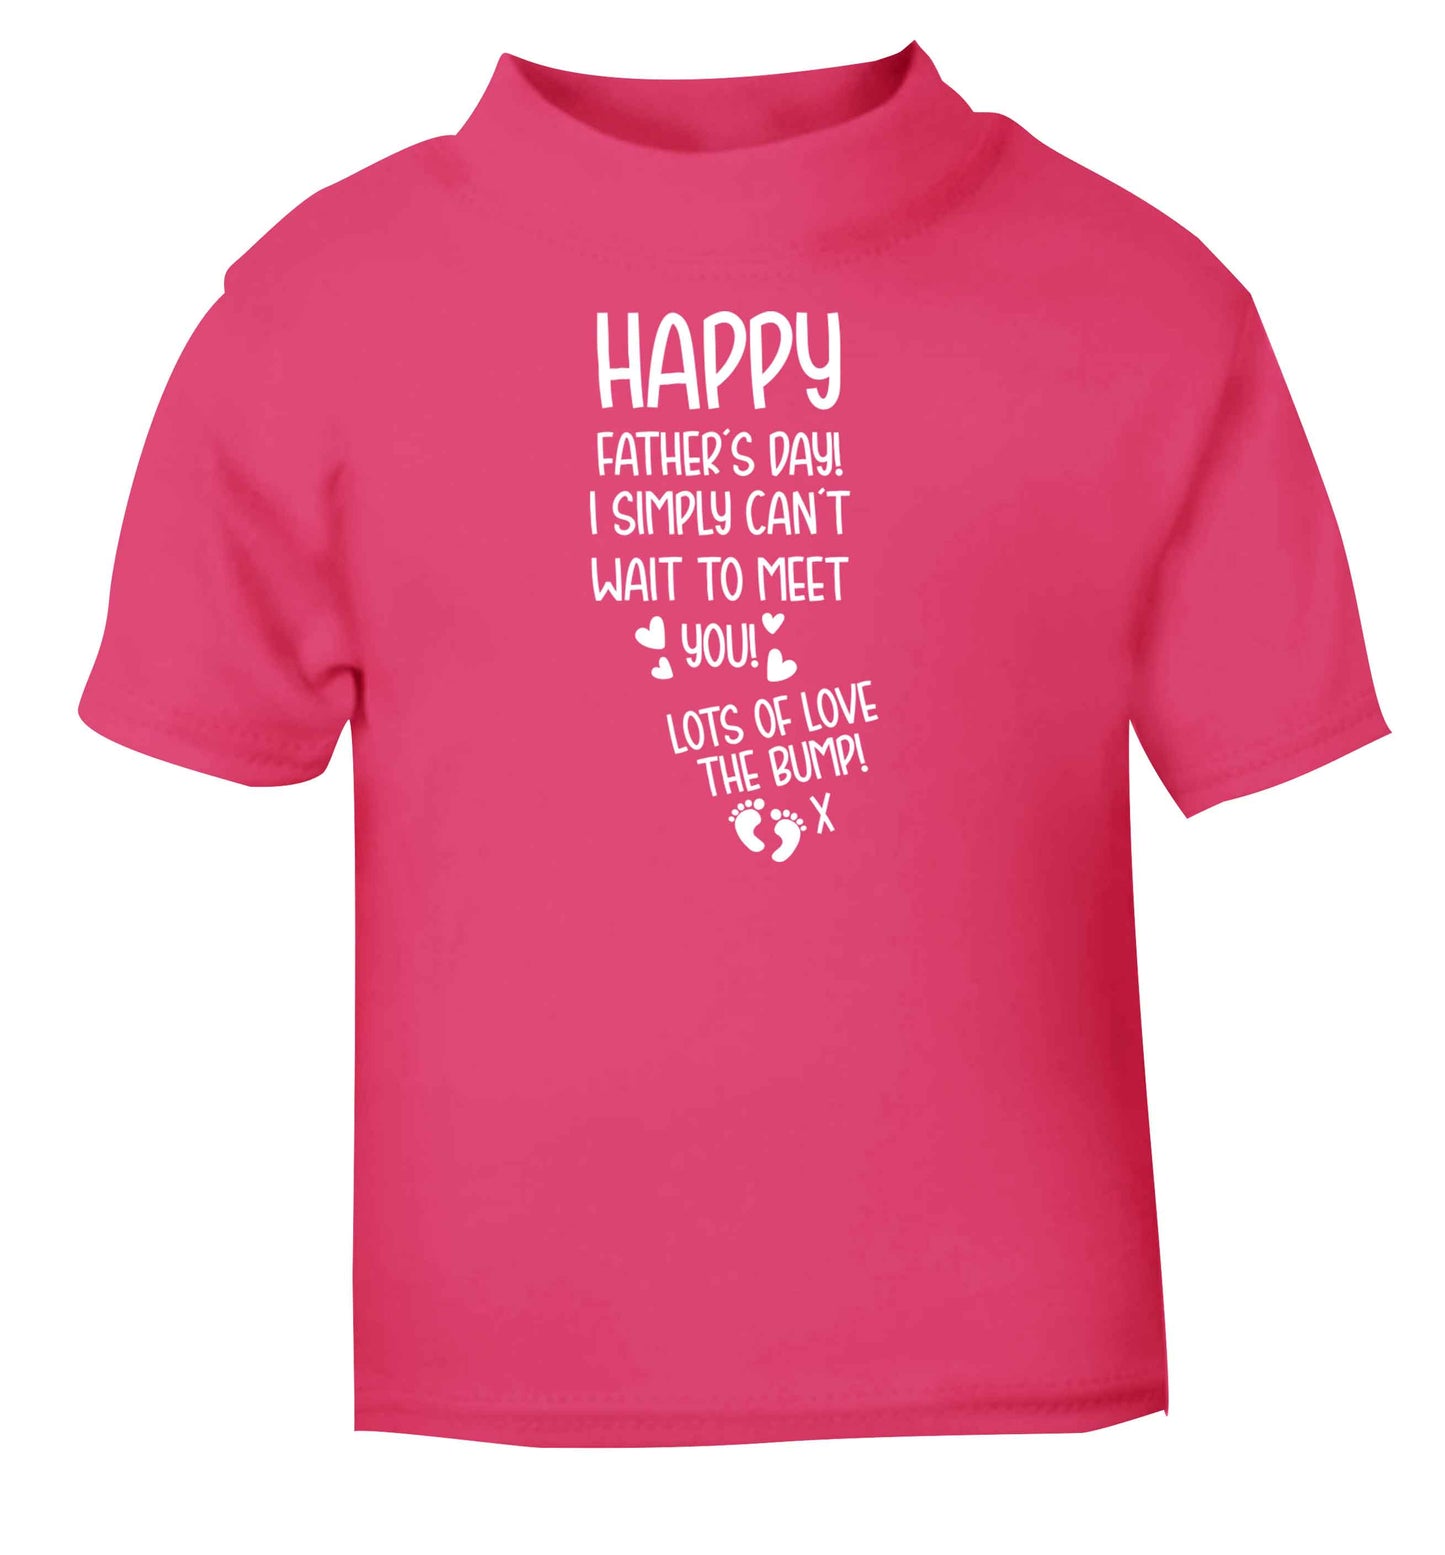 Happy Father's day daddy I can't wait to meet you lot's of love the bump! pink baby toddler Tshirt 2 Years